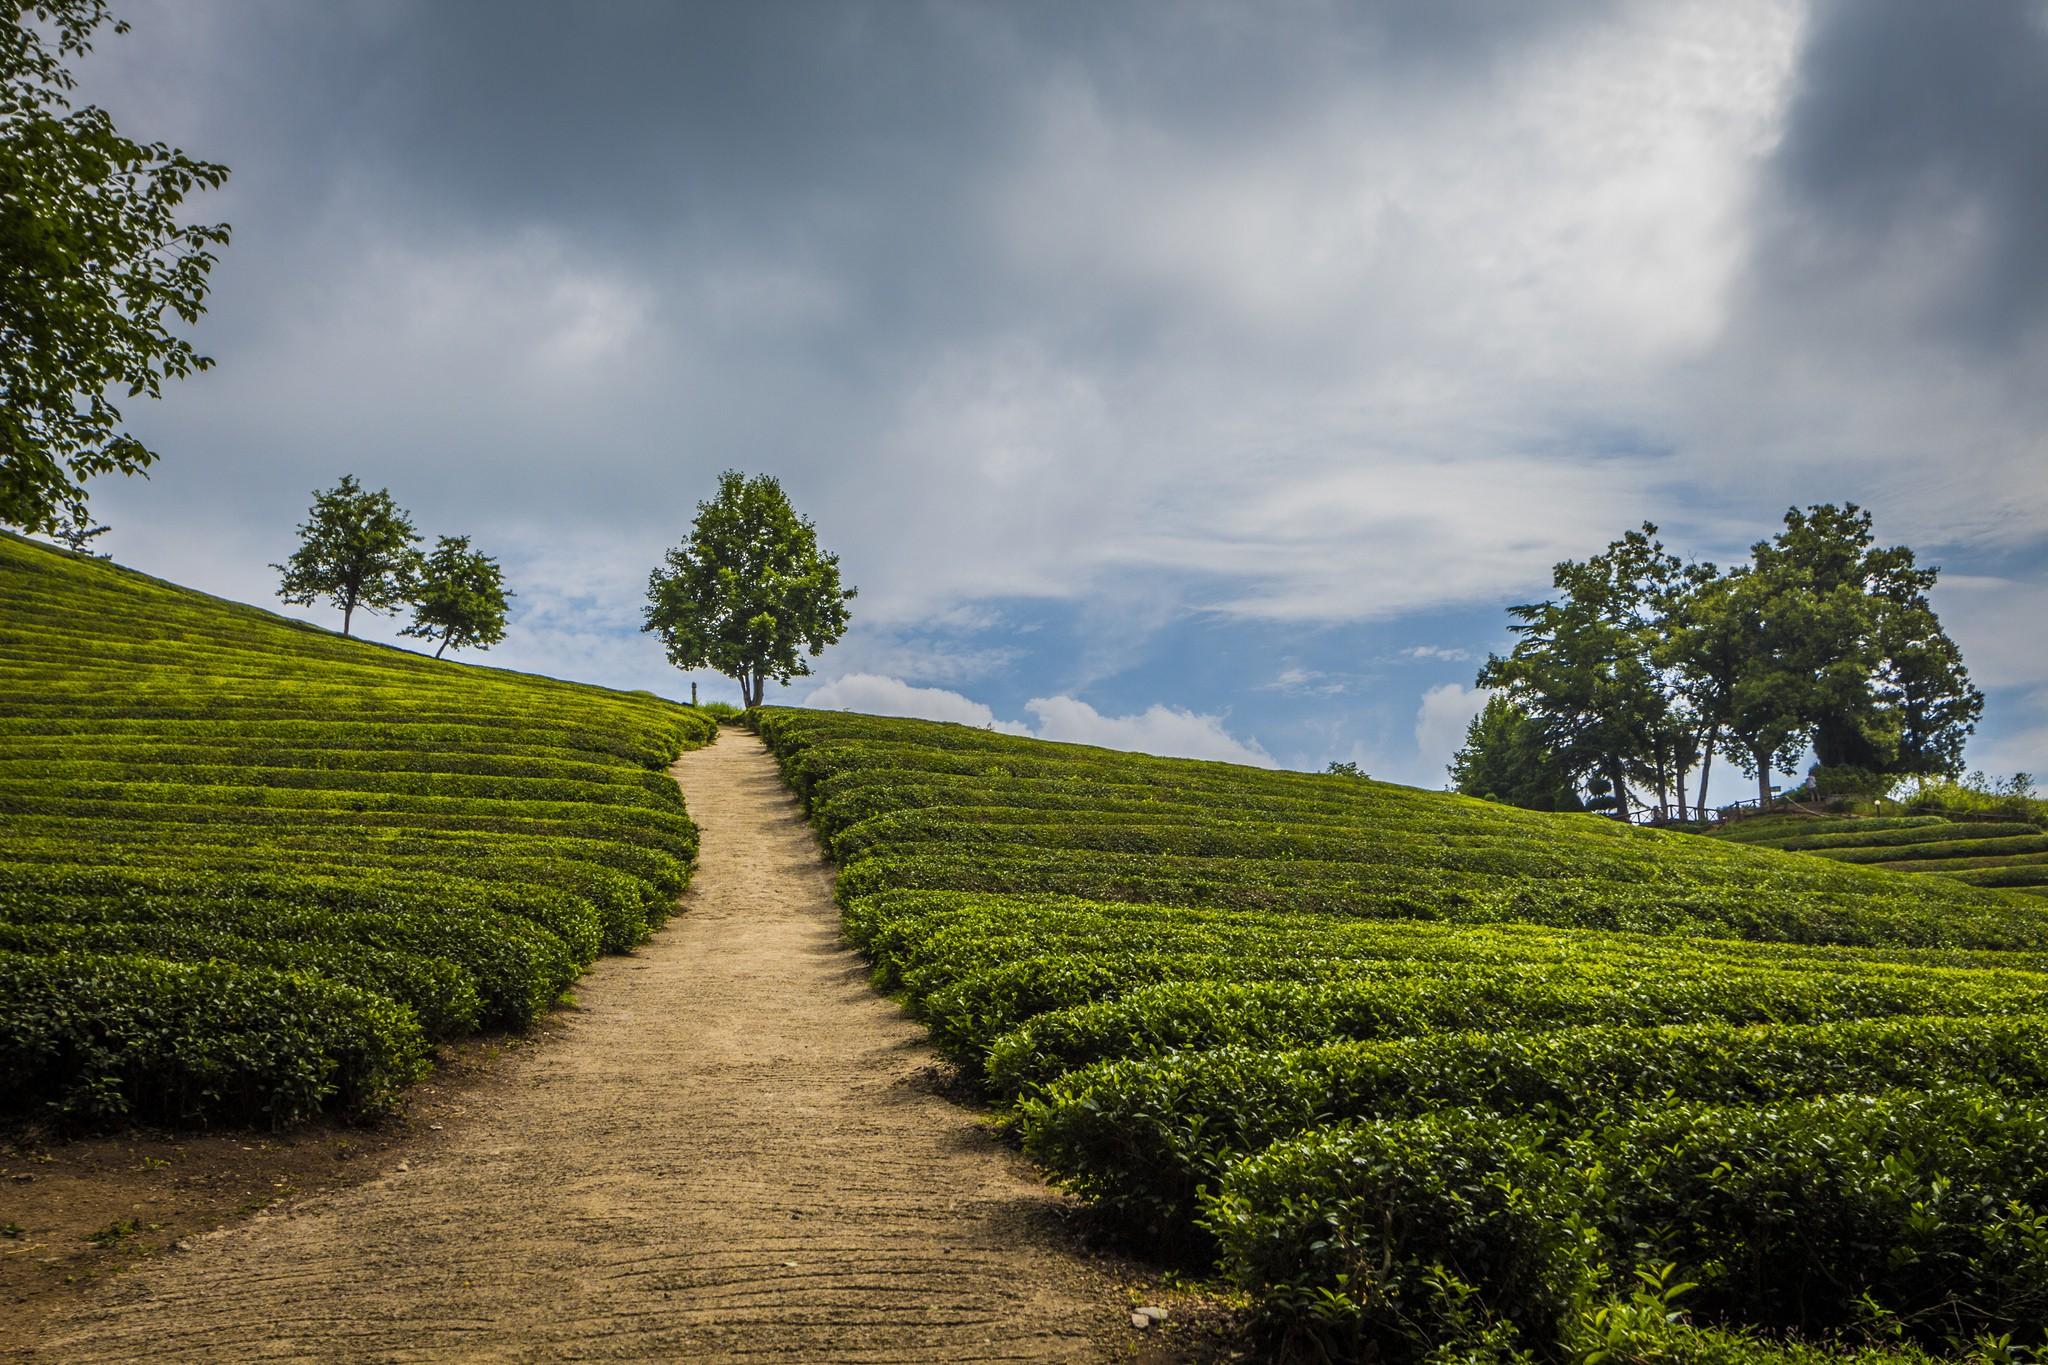 Stunning Picture of South Korea's Tea Plantations